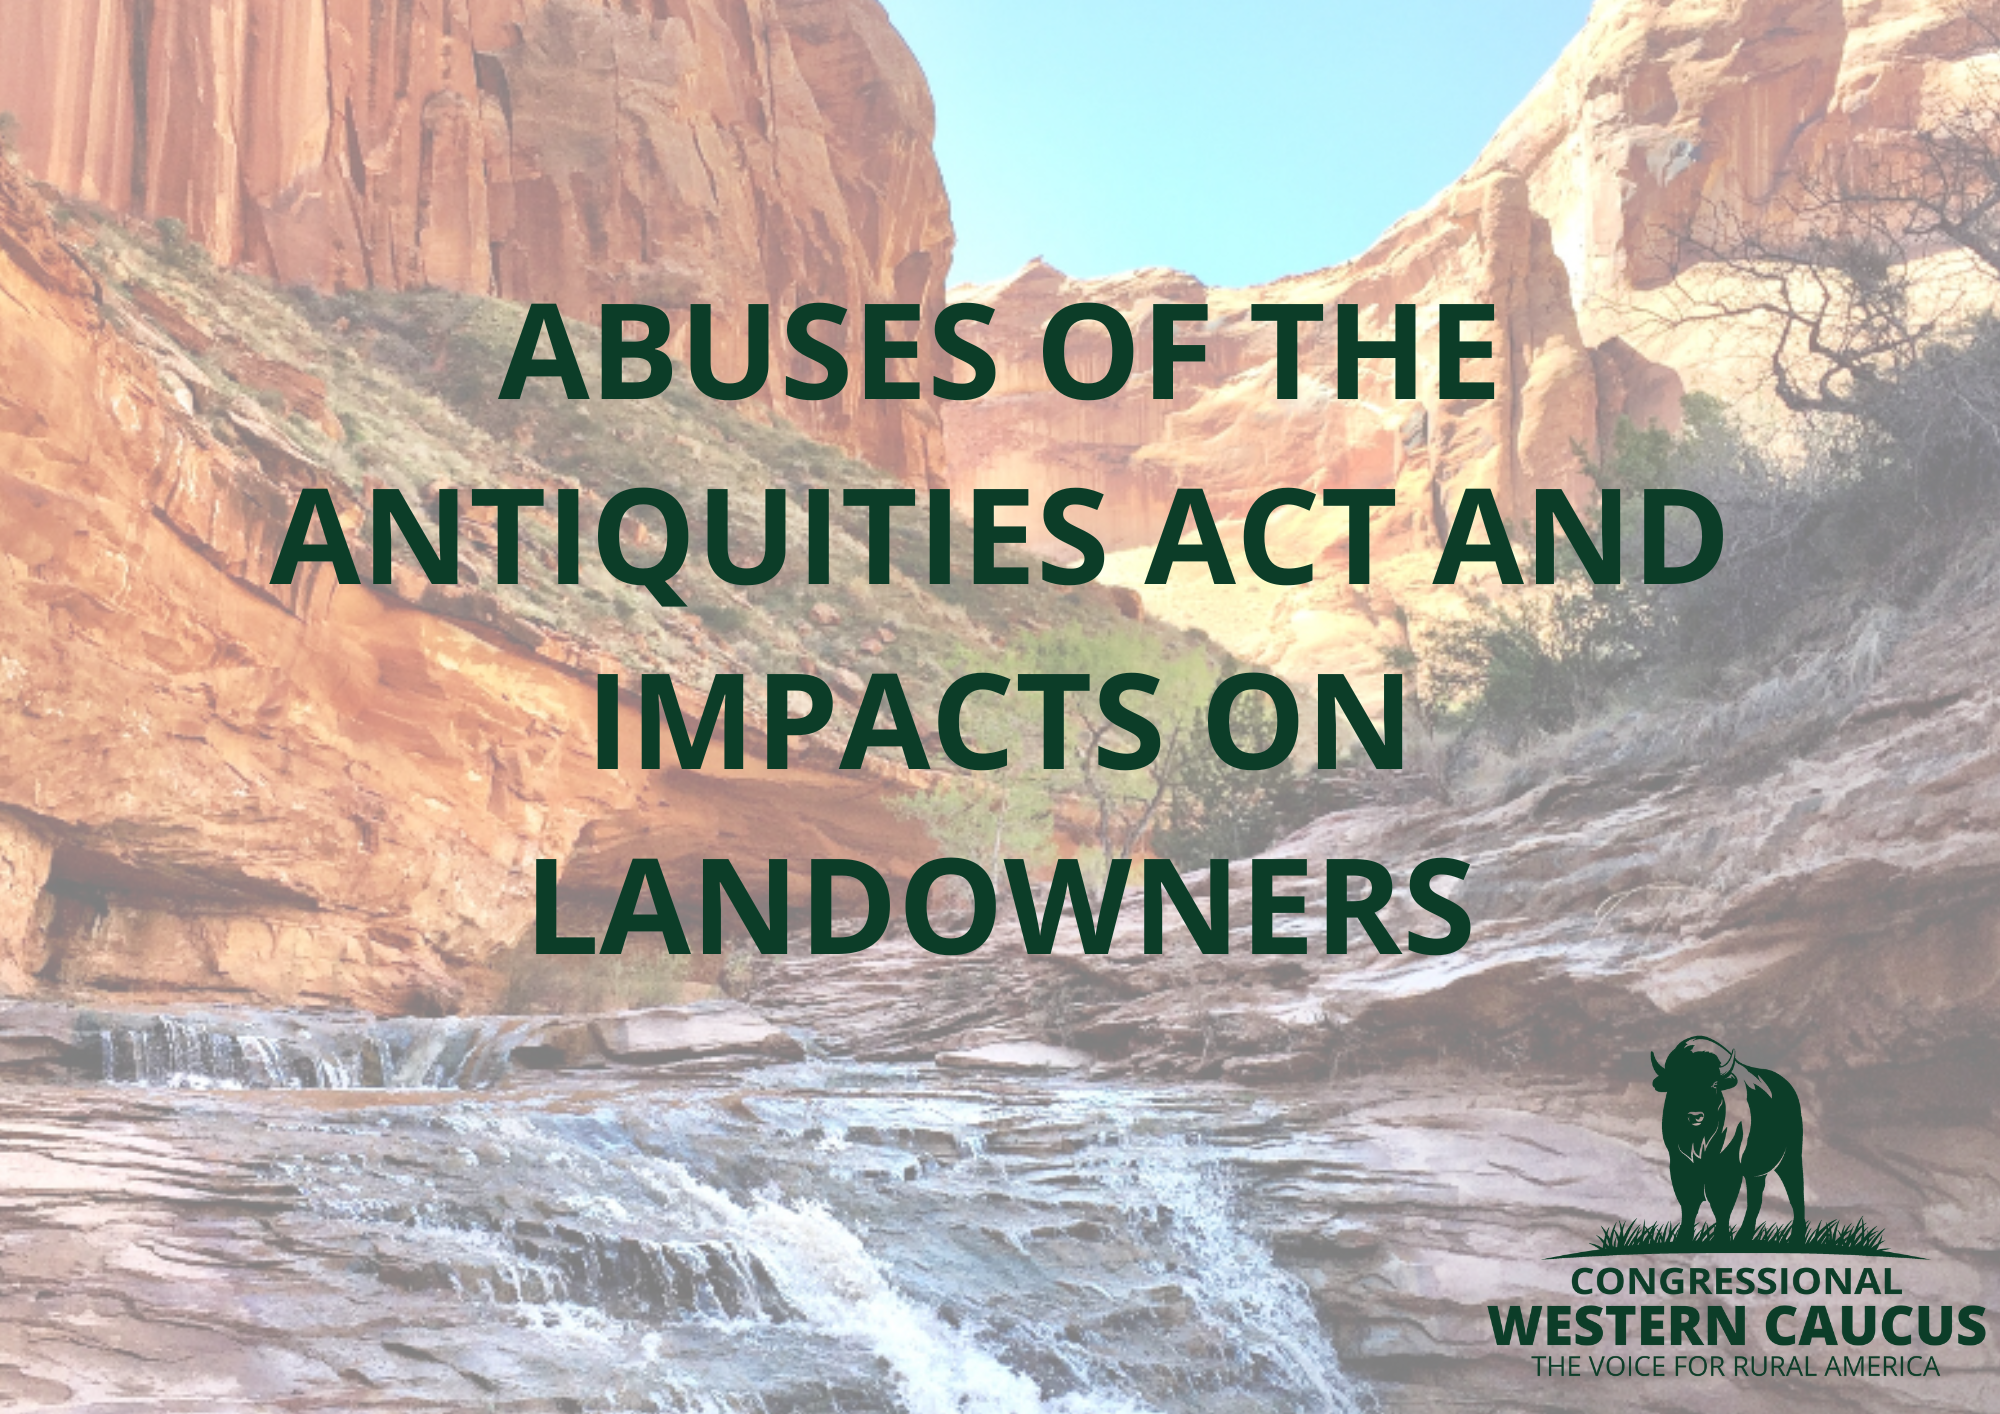 Forum Highlights the Abuses of the Antiquities Act and its Impacts on Landowners